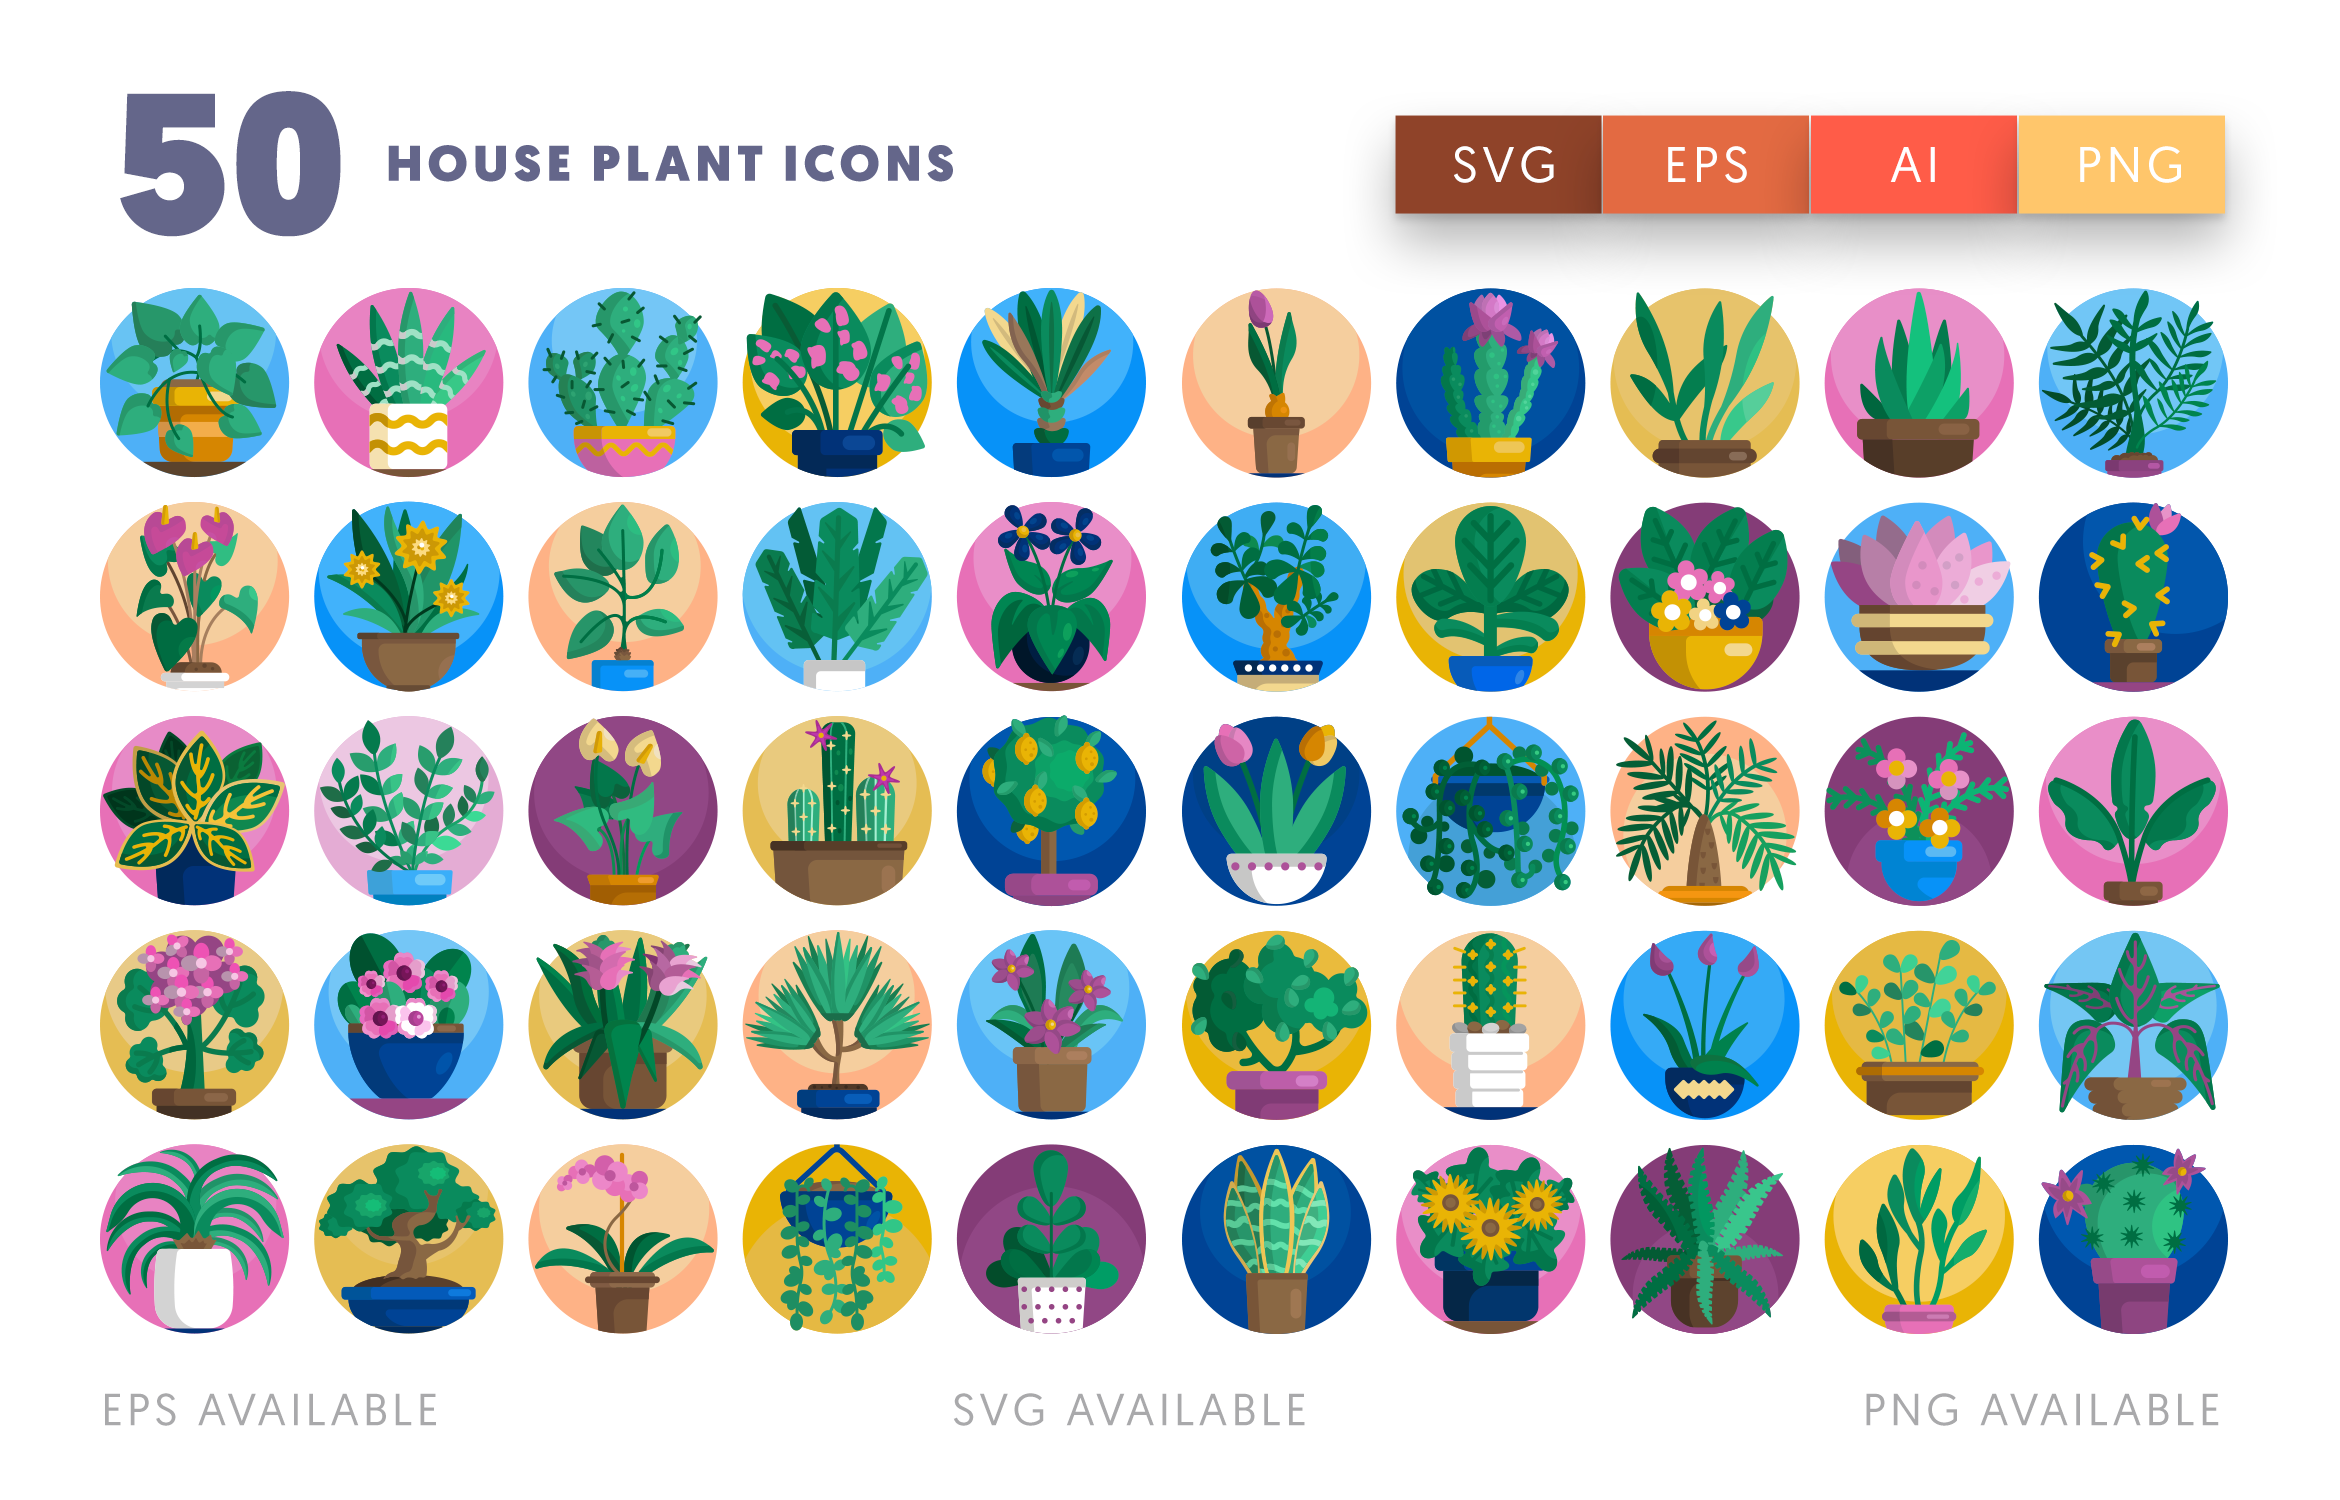 50 House Plant Icons